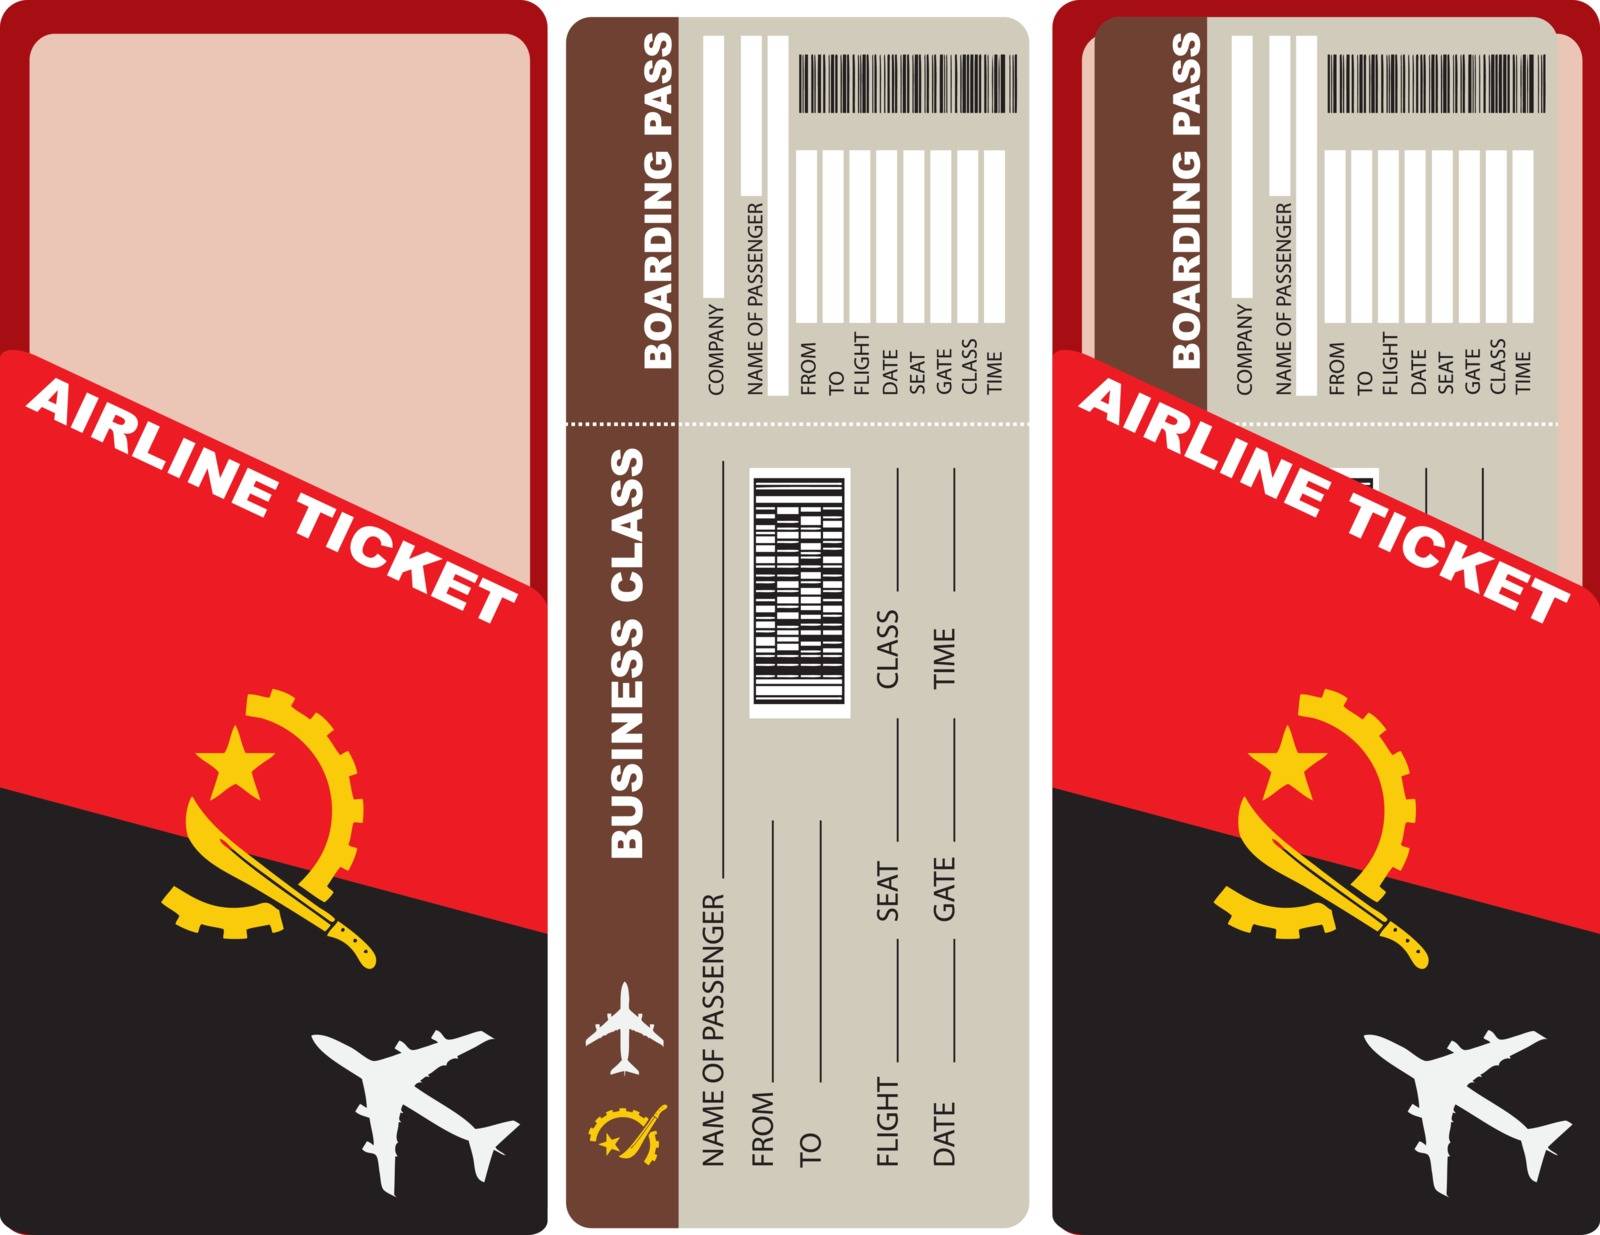 Business Class Flight departing flights to Angola. Ticket included with the envelope and the authentic character of the country.